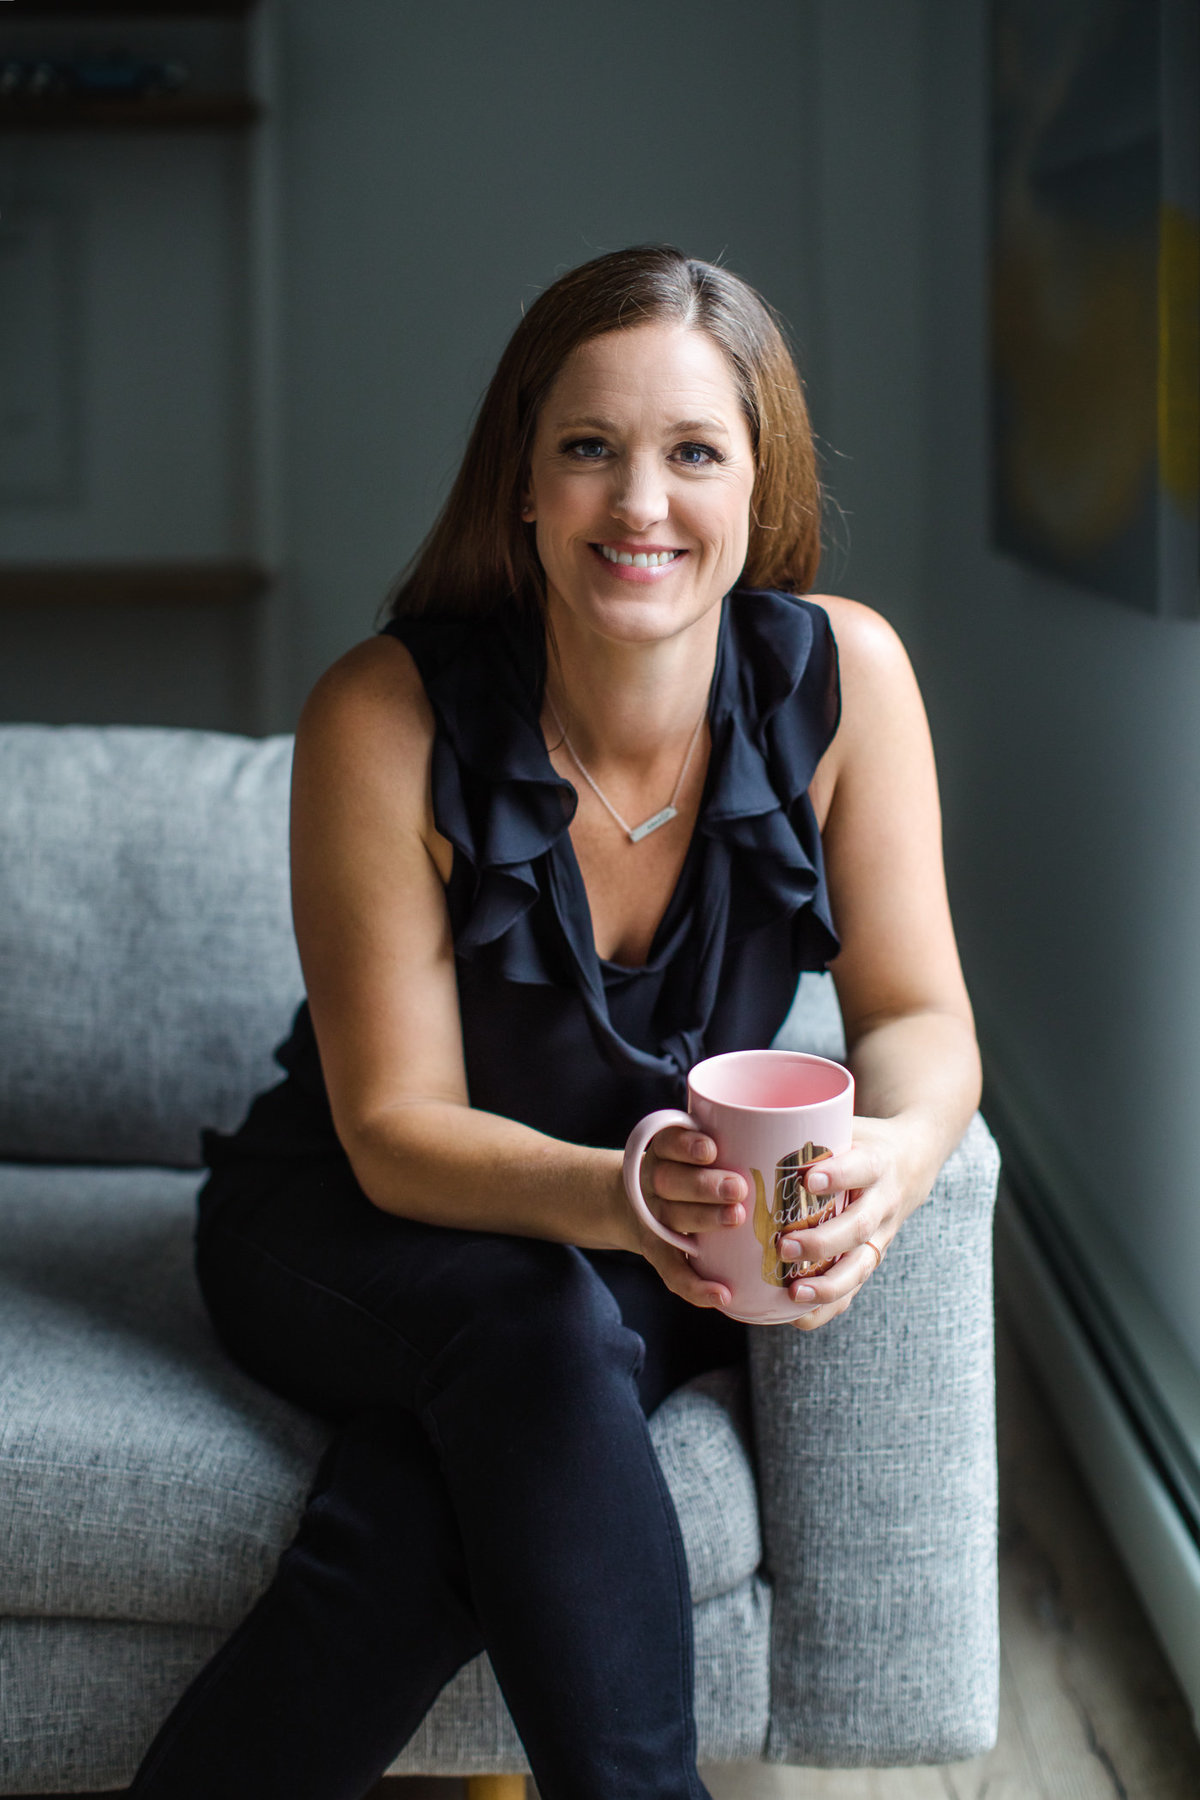 Portrait of woman smiling on a couch with coffee cup